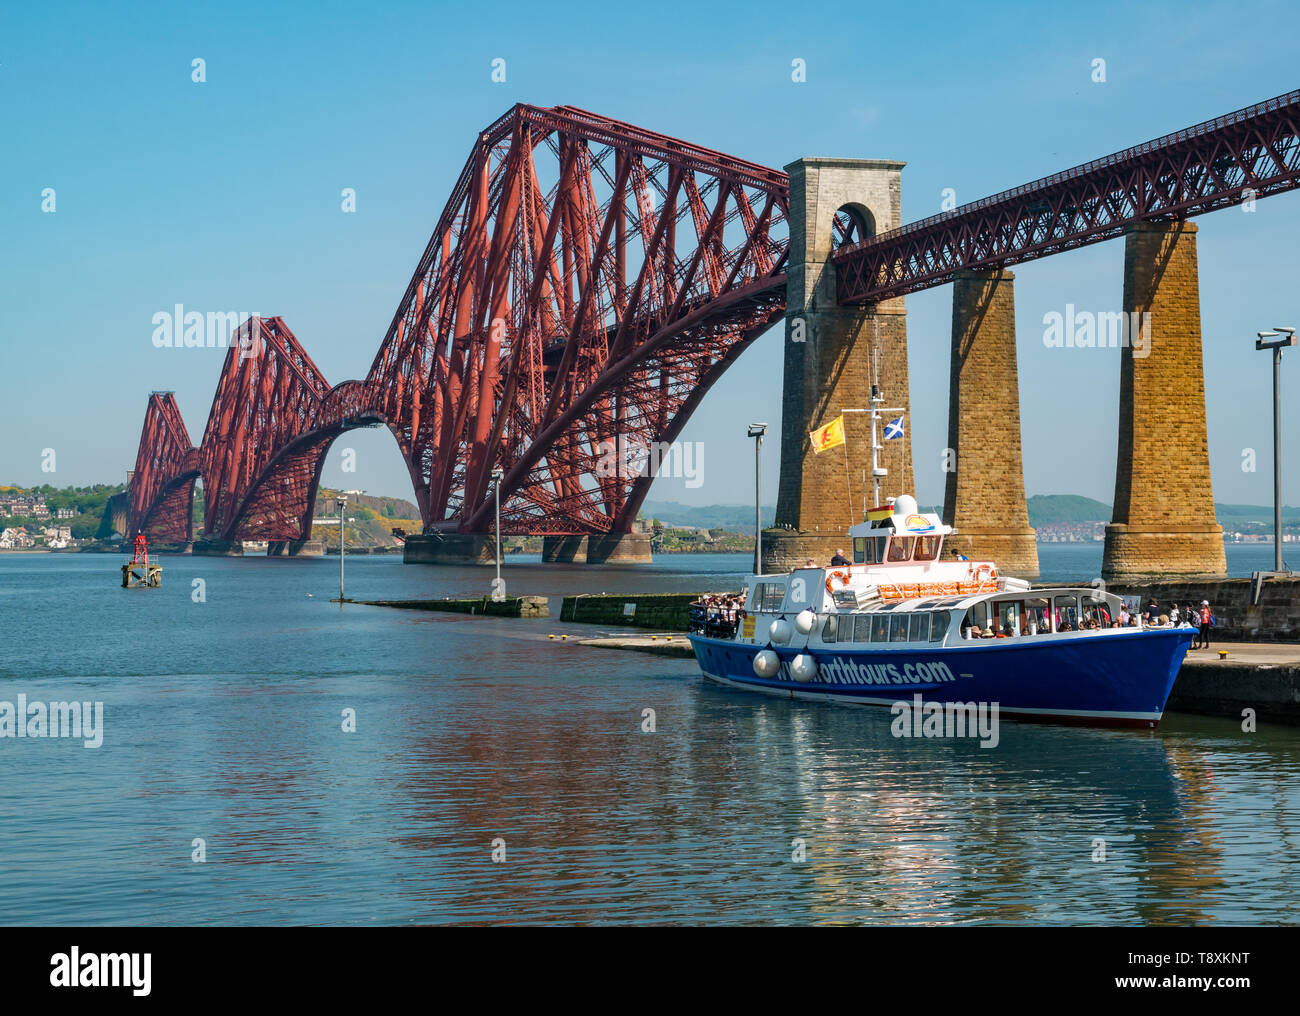 South Queensferry, Scotland, United Kingdom, 15 May 2019. UK Weather: A sunny warm day on the Firth of Forth coast at the iconic Forth Rail Bridge and a tourist boat loading passengers Stock Photo